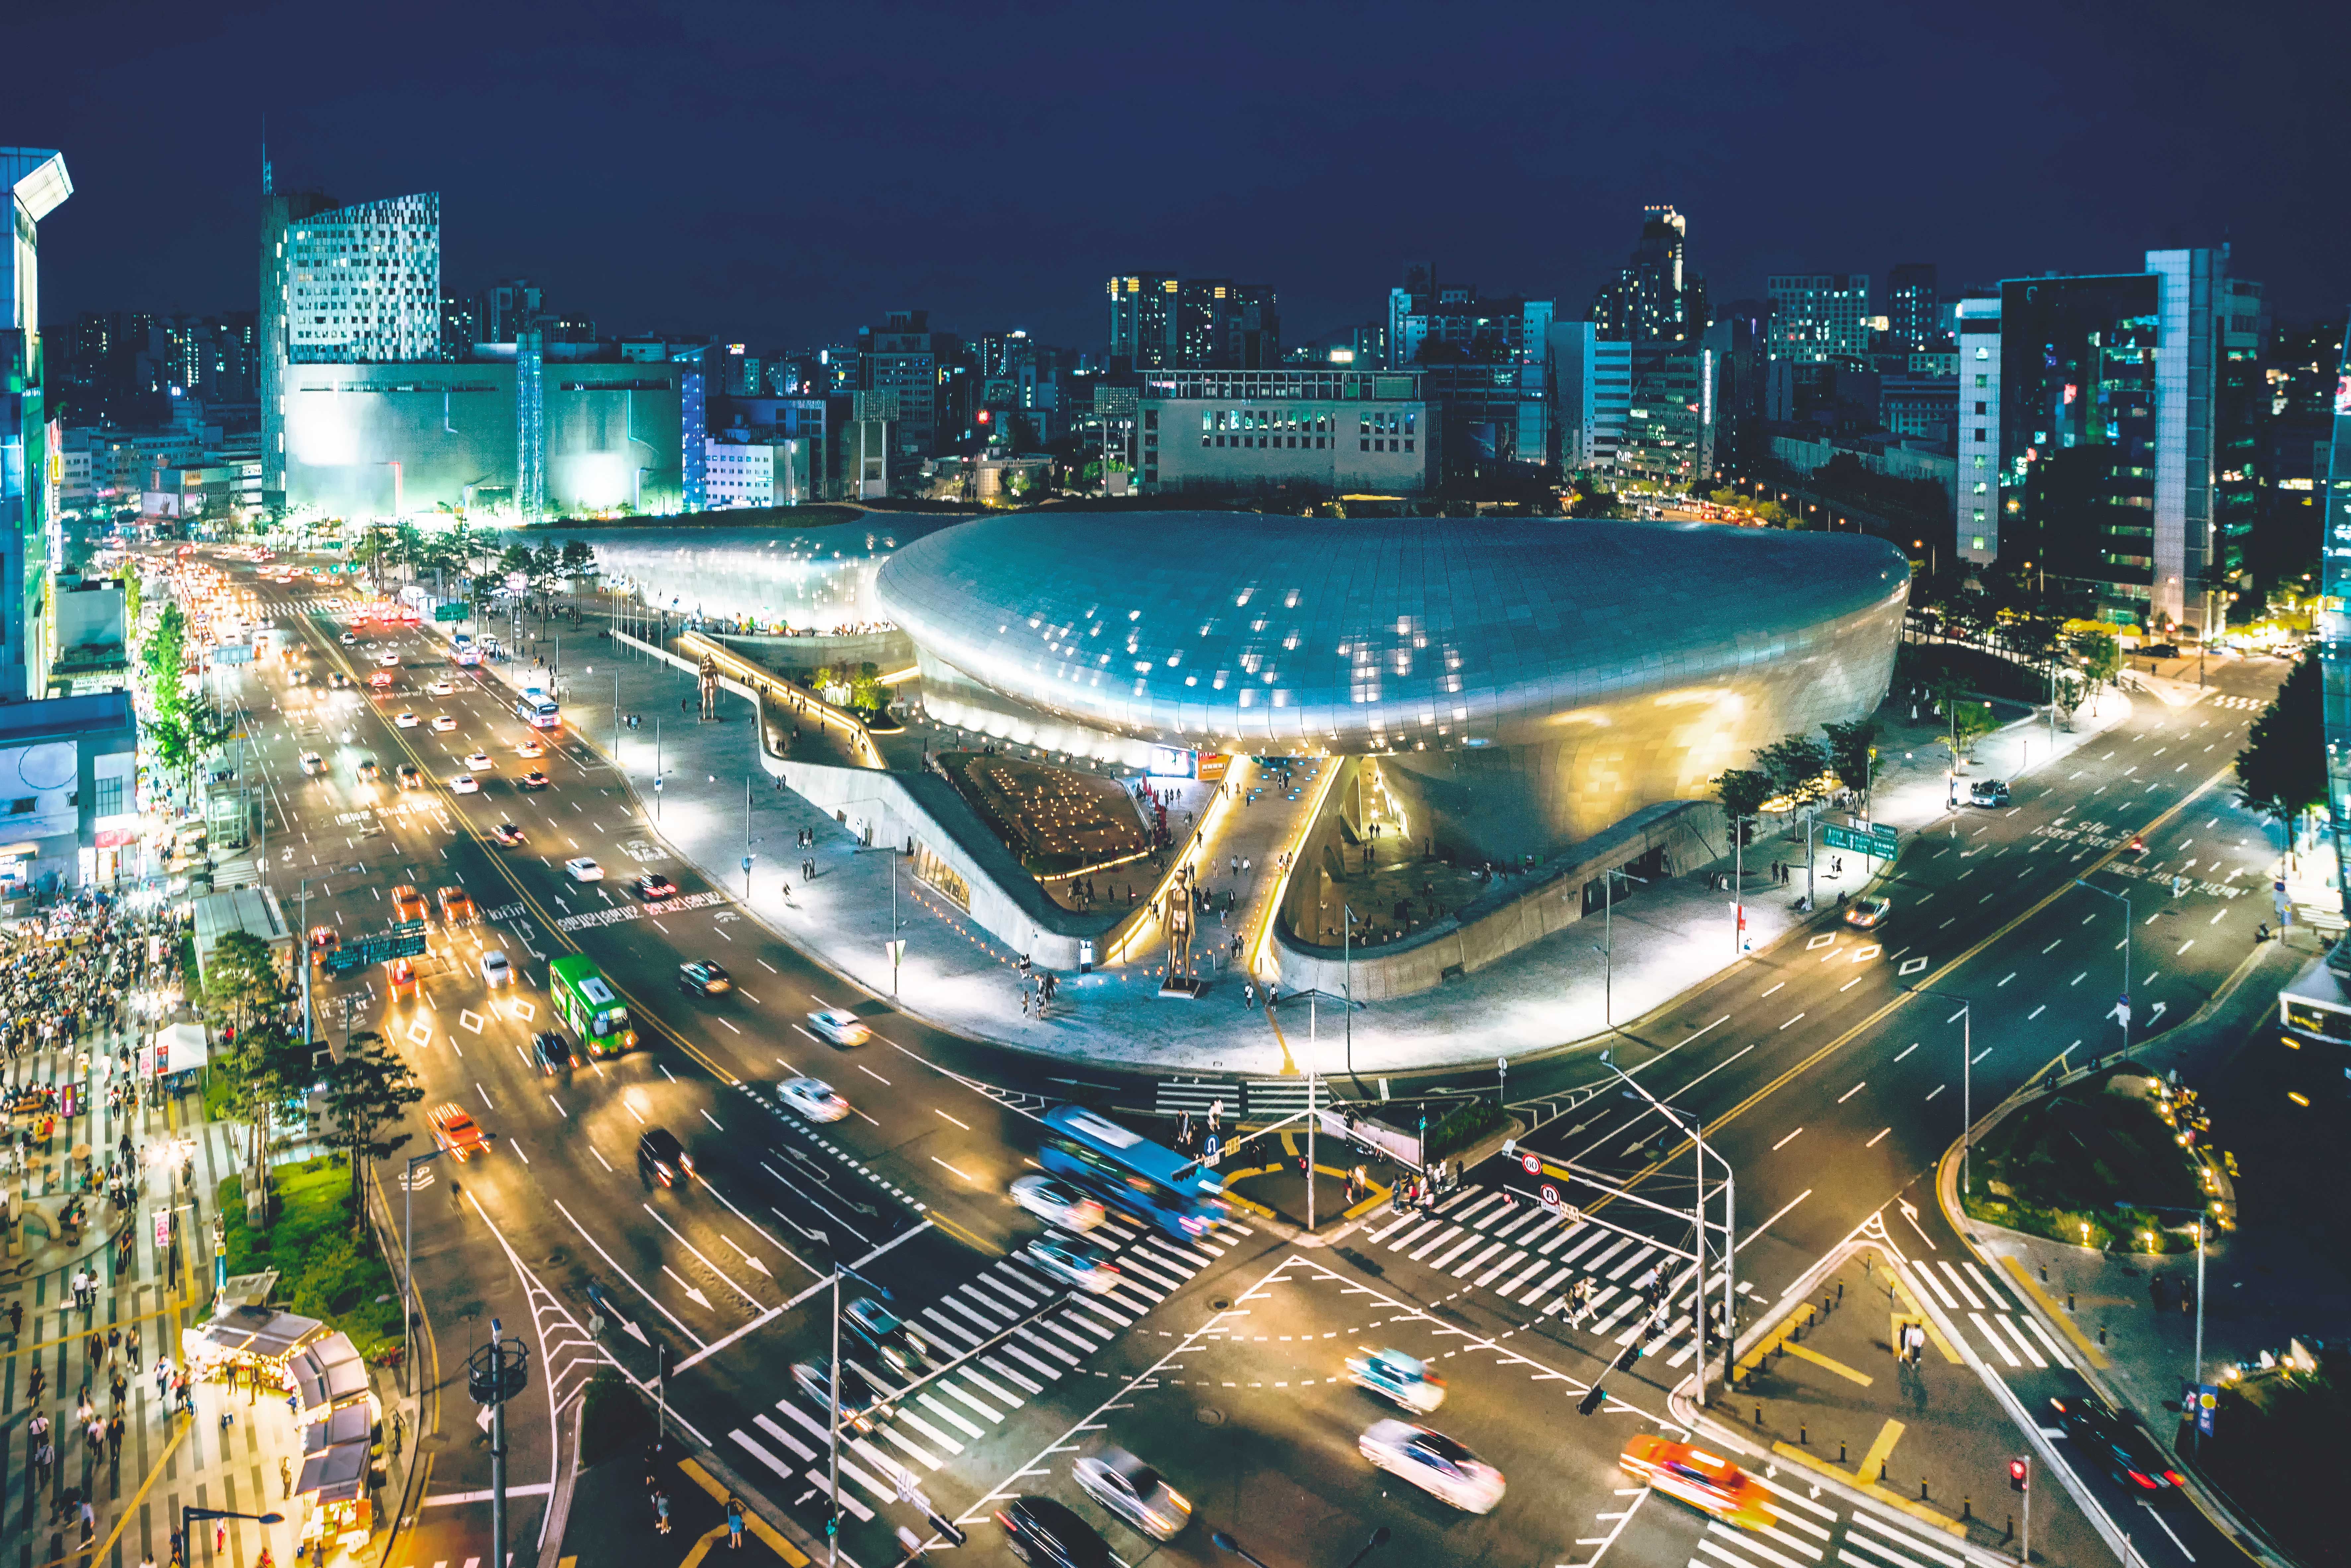 ddp plaza and dongdaemun gate area